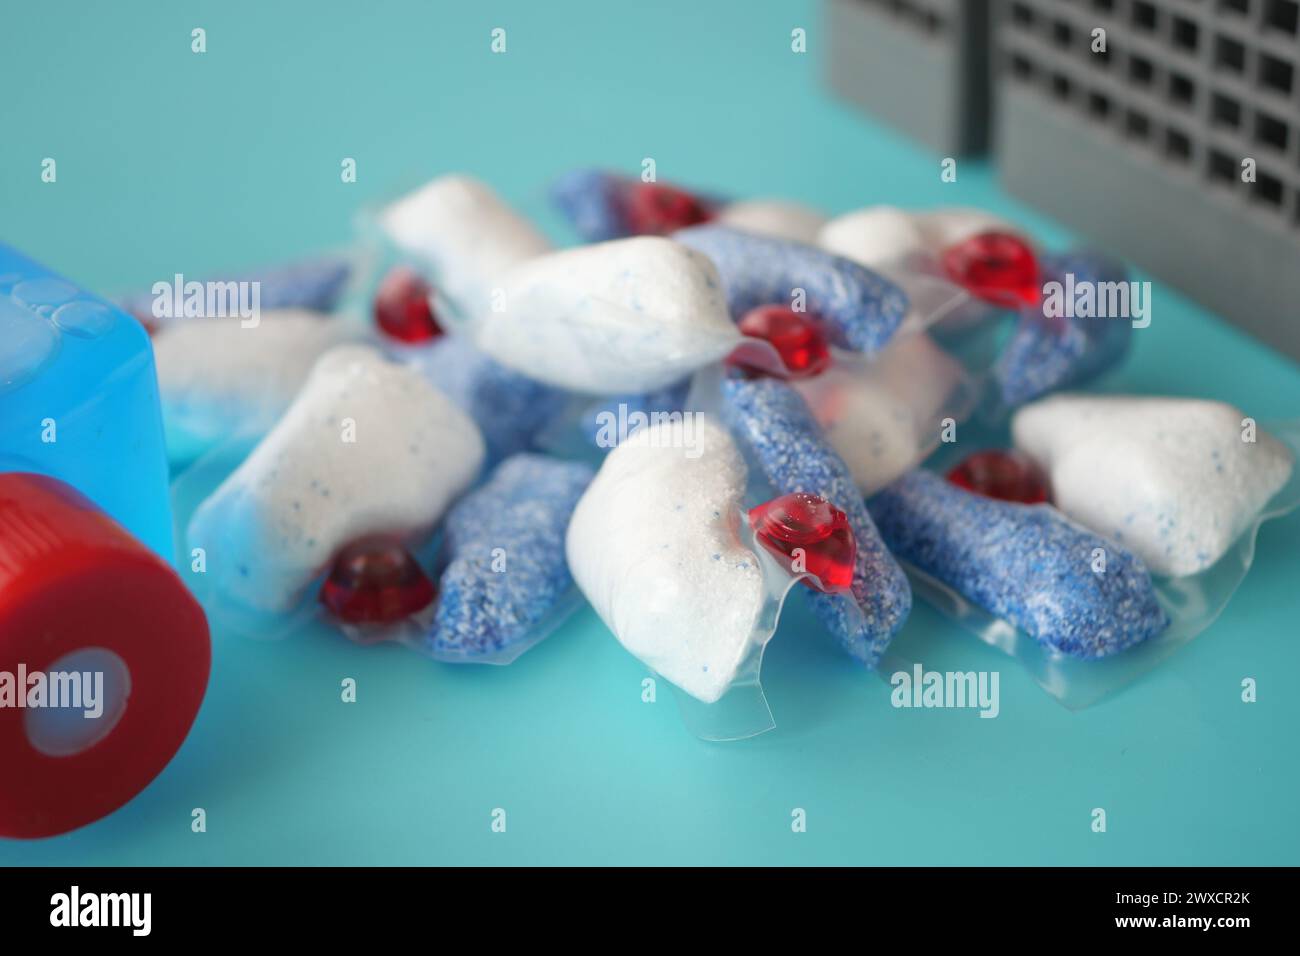 A stack of dishwasher tablets and a bottle of detergent on a blue background Stock Photo